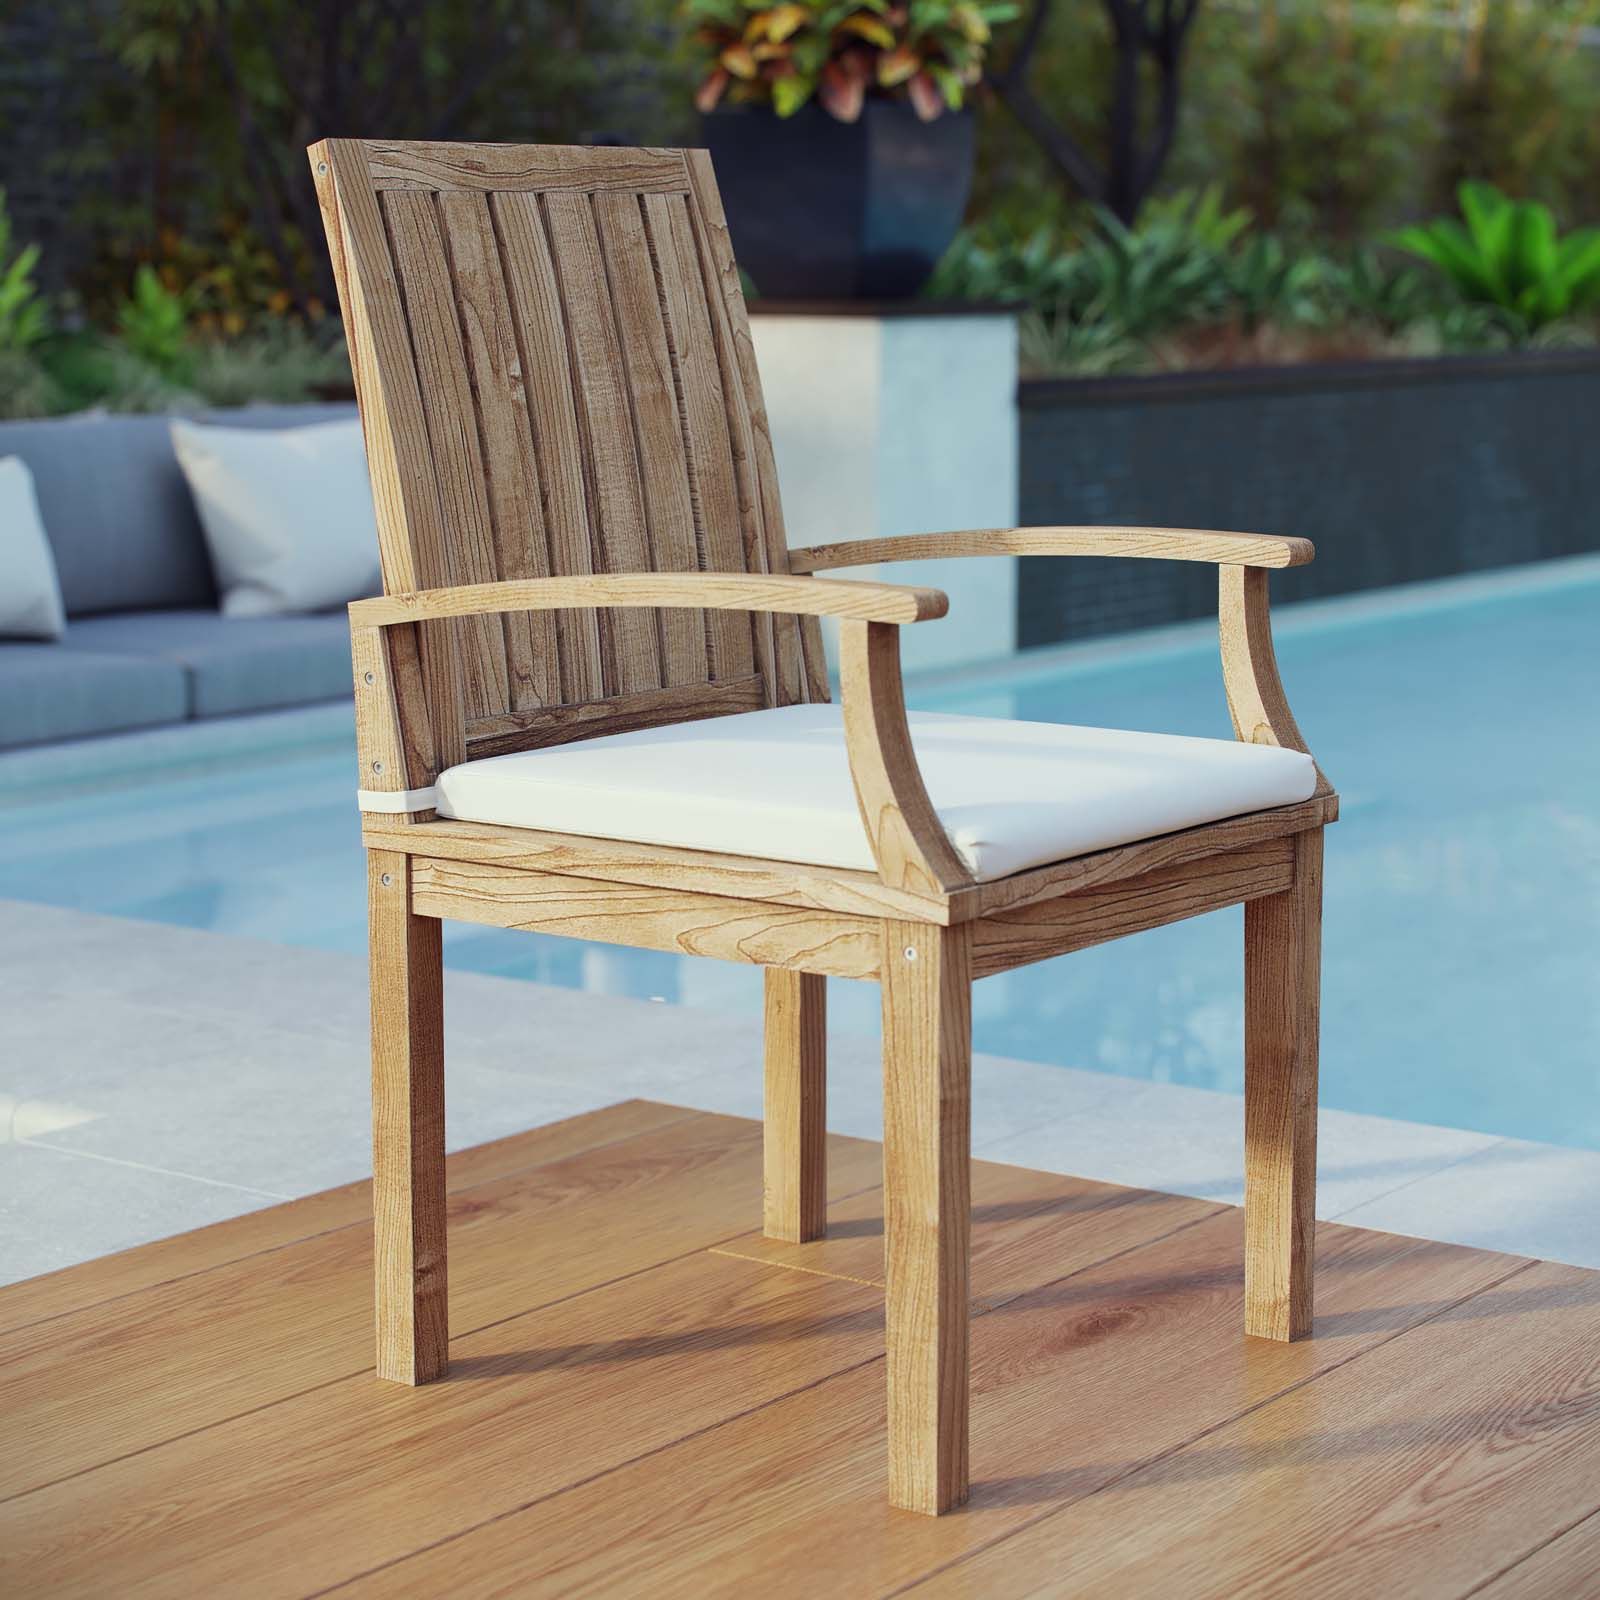 Current Natural Wood Outdoor Chairs For Modterior :: Outdoor :: Outdoor Chairs :: Marina Outdoor Patio Teak (View 1 of 15)